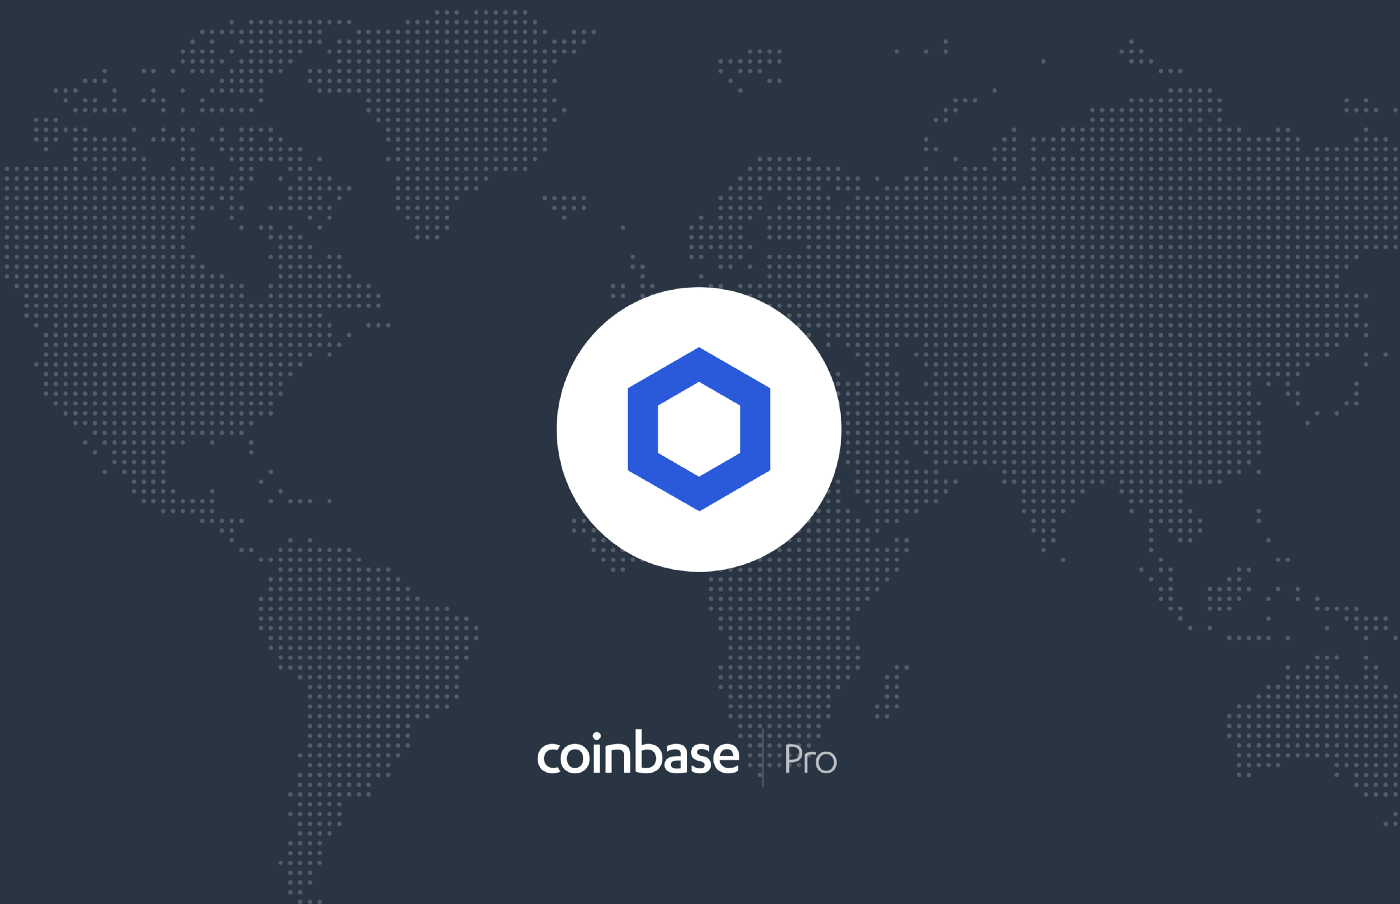 Chainlink (LINK) has launched on Coinbase Pro